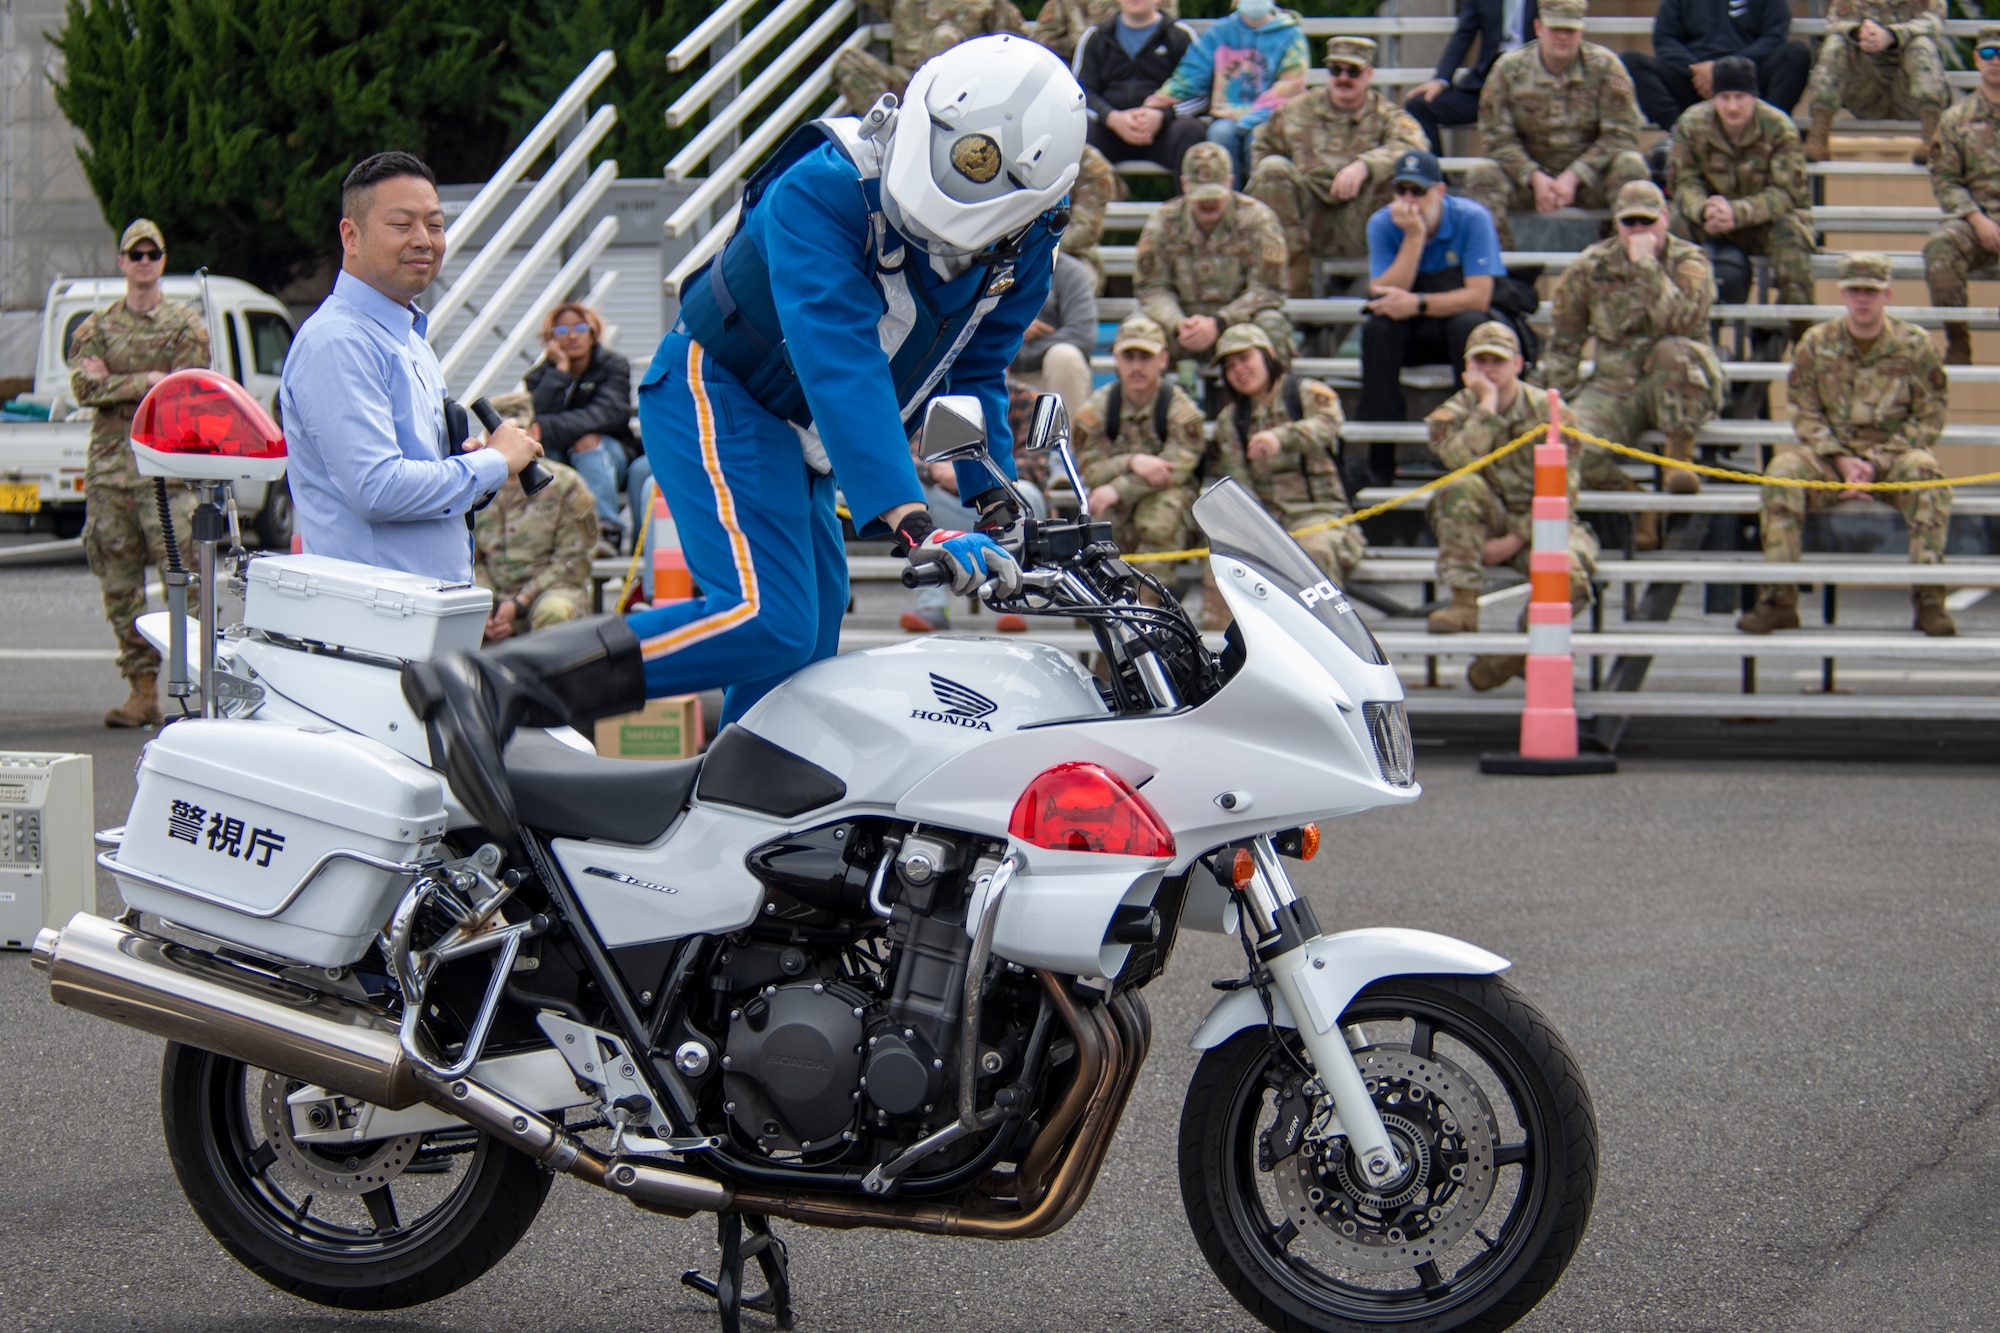 a policeman climbs aboard a motorcycle in front of a crowd